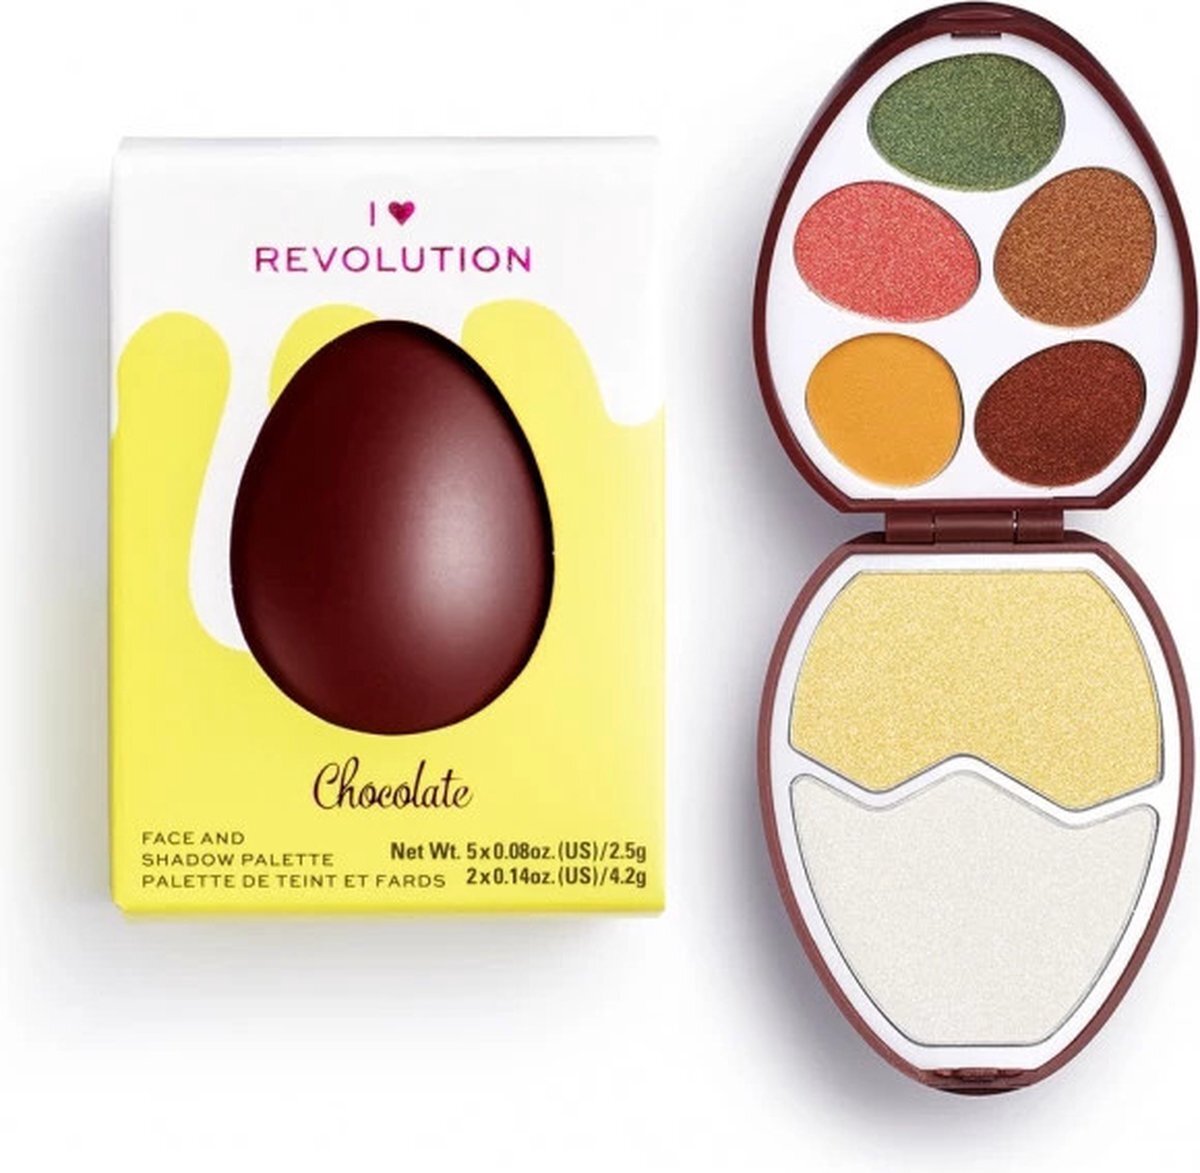 Makeup Revolution I Love Revolution Face and Shadow Palette - Chocolate